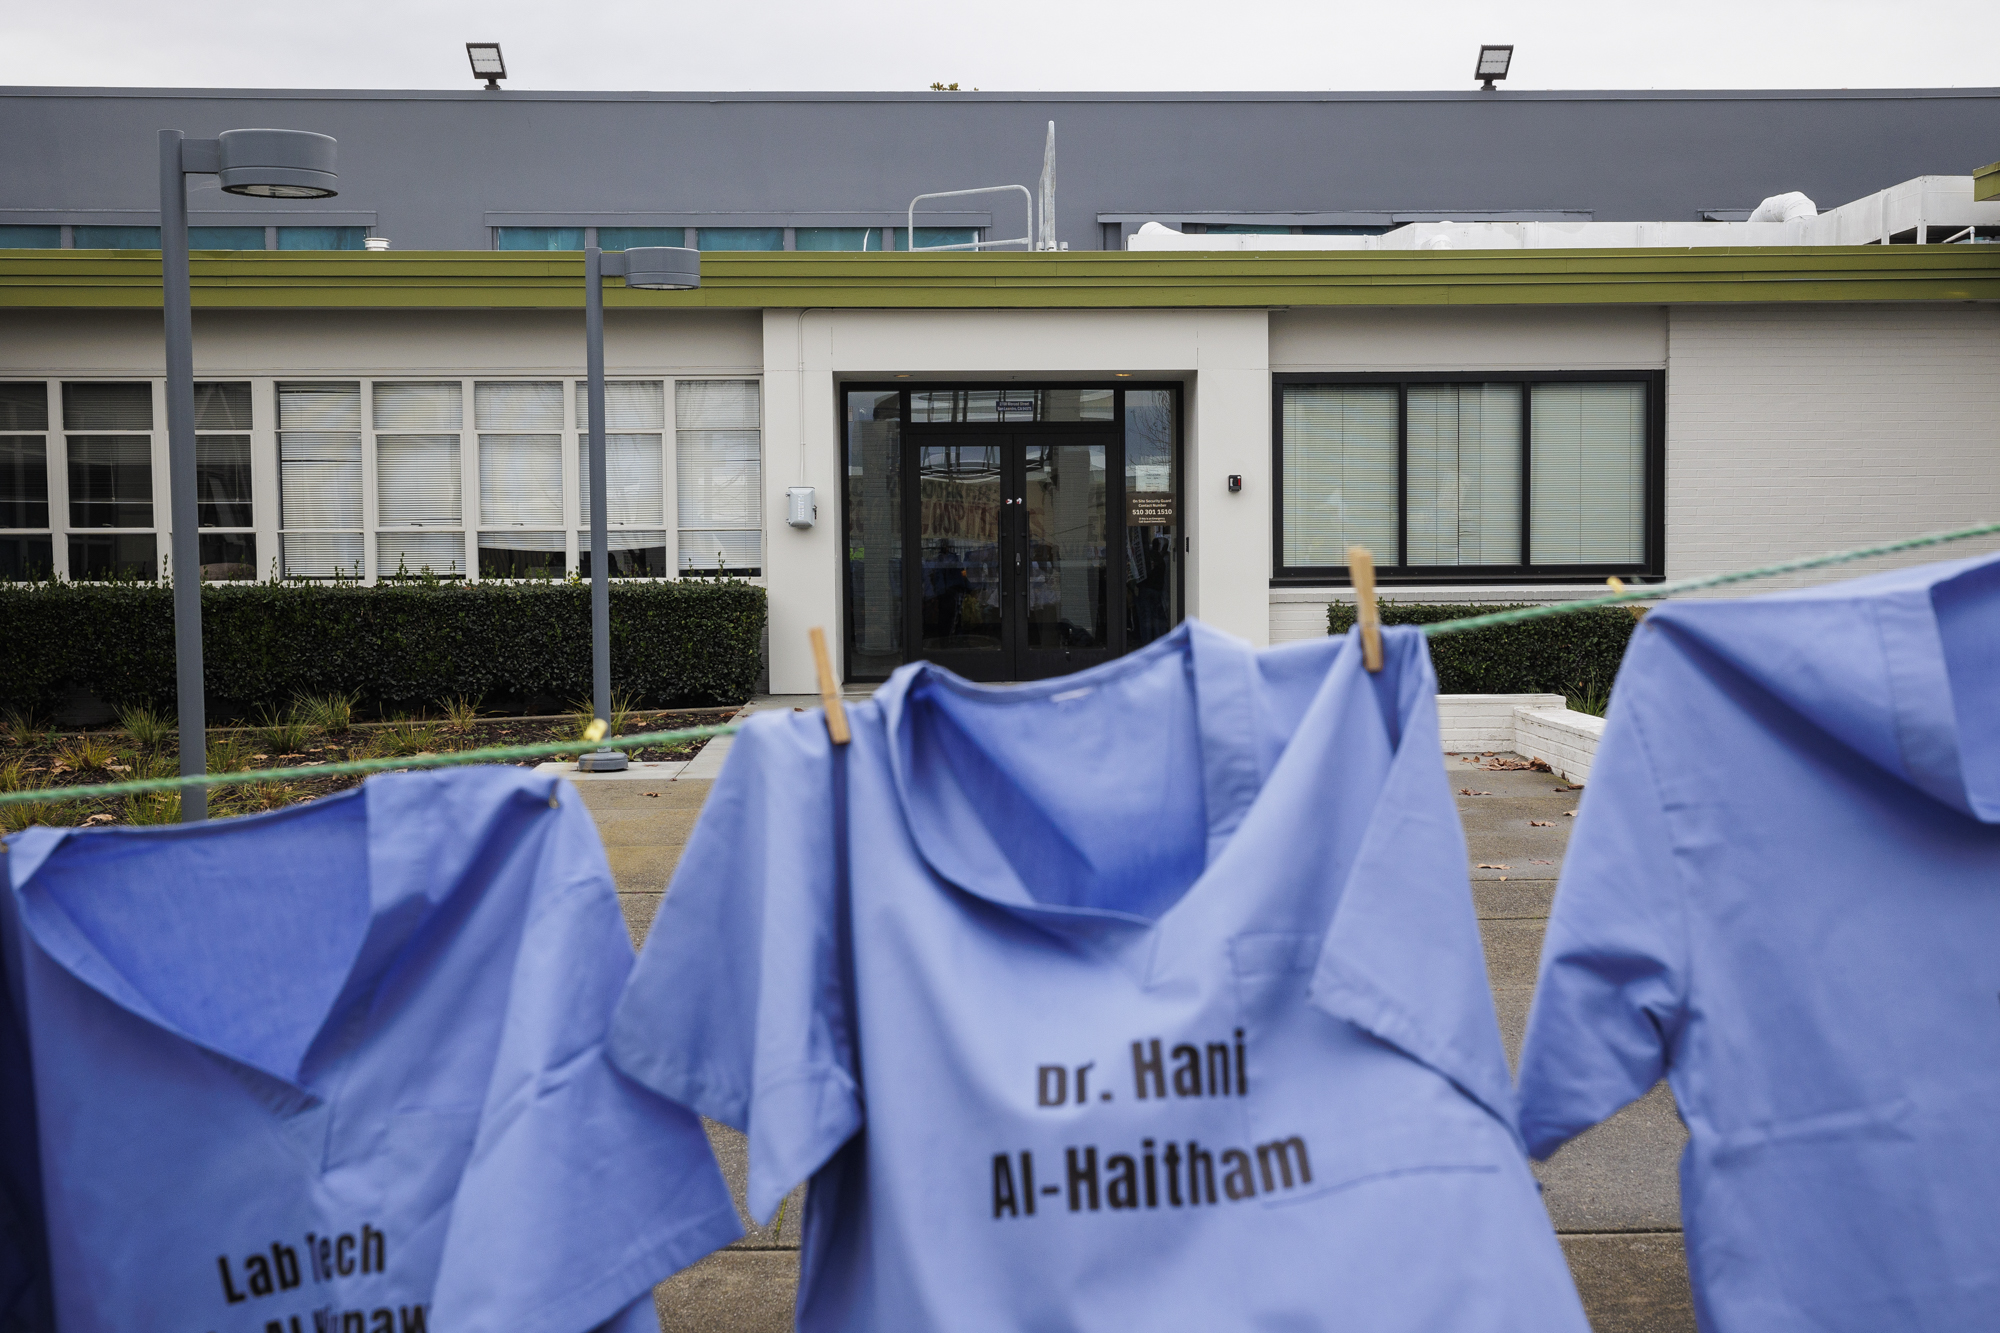 The names of healthcare workers killed in Gaza are printed on scrubs hung in front of the L3 Harris office in San Leandro on Jan. 24, 2024.